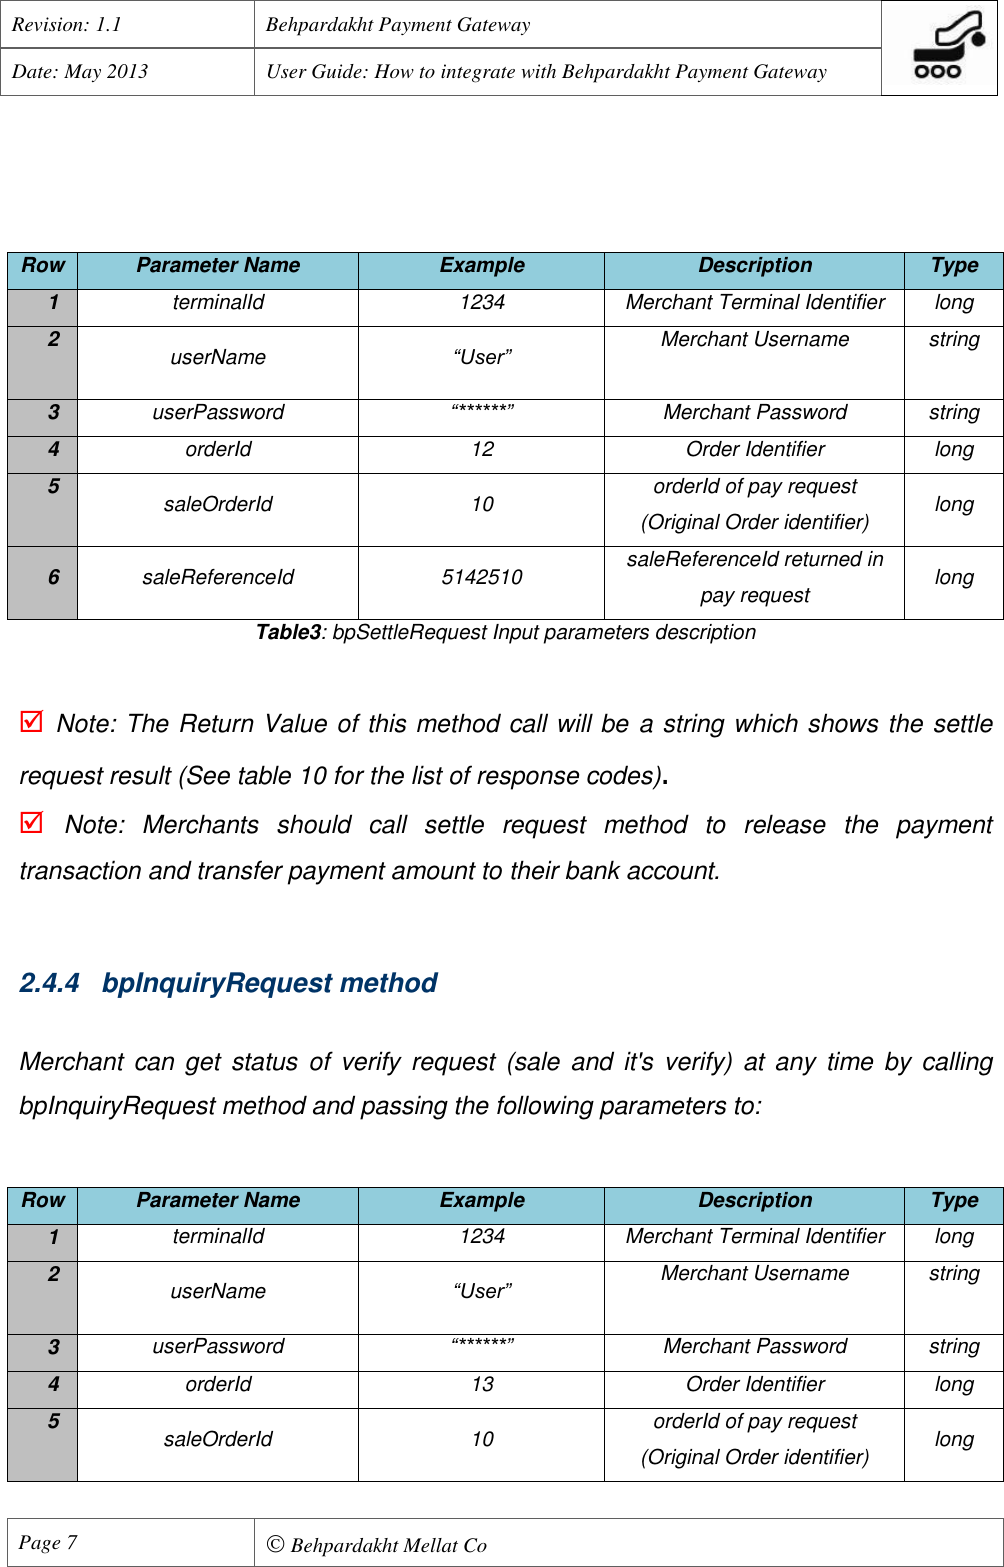 Page 8 of 11 - Behpardakht Mellat - Payment Gateway PGW User Manual English Ver 1.1